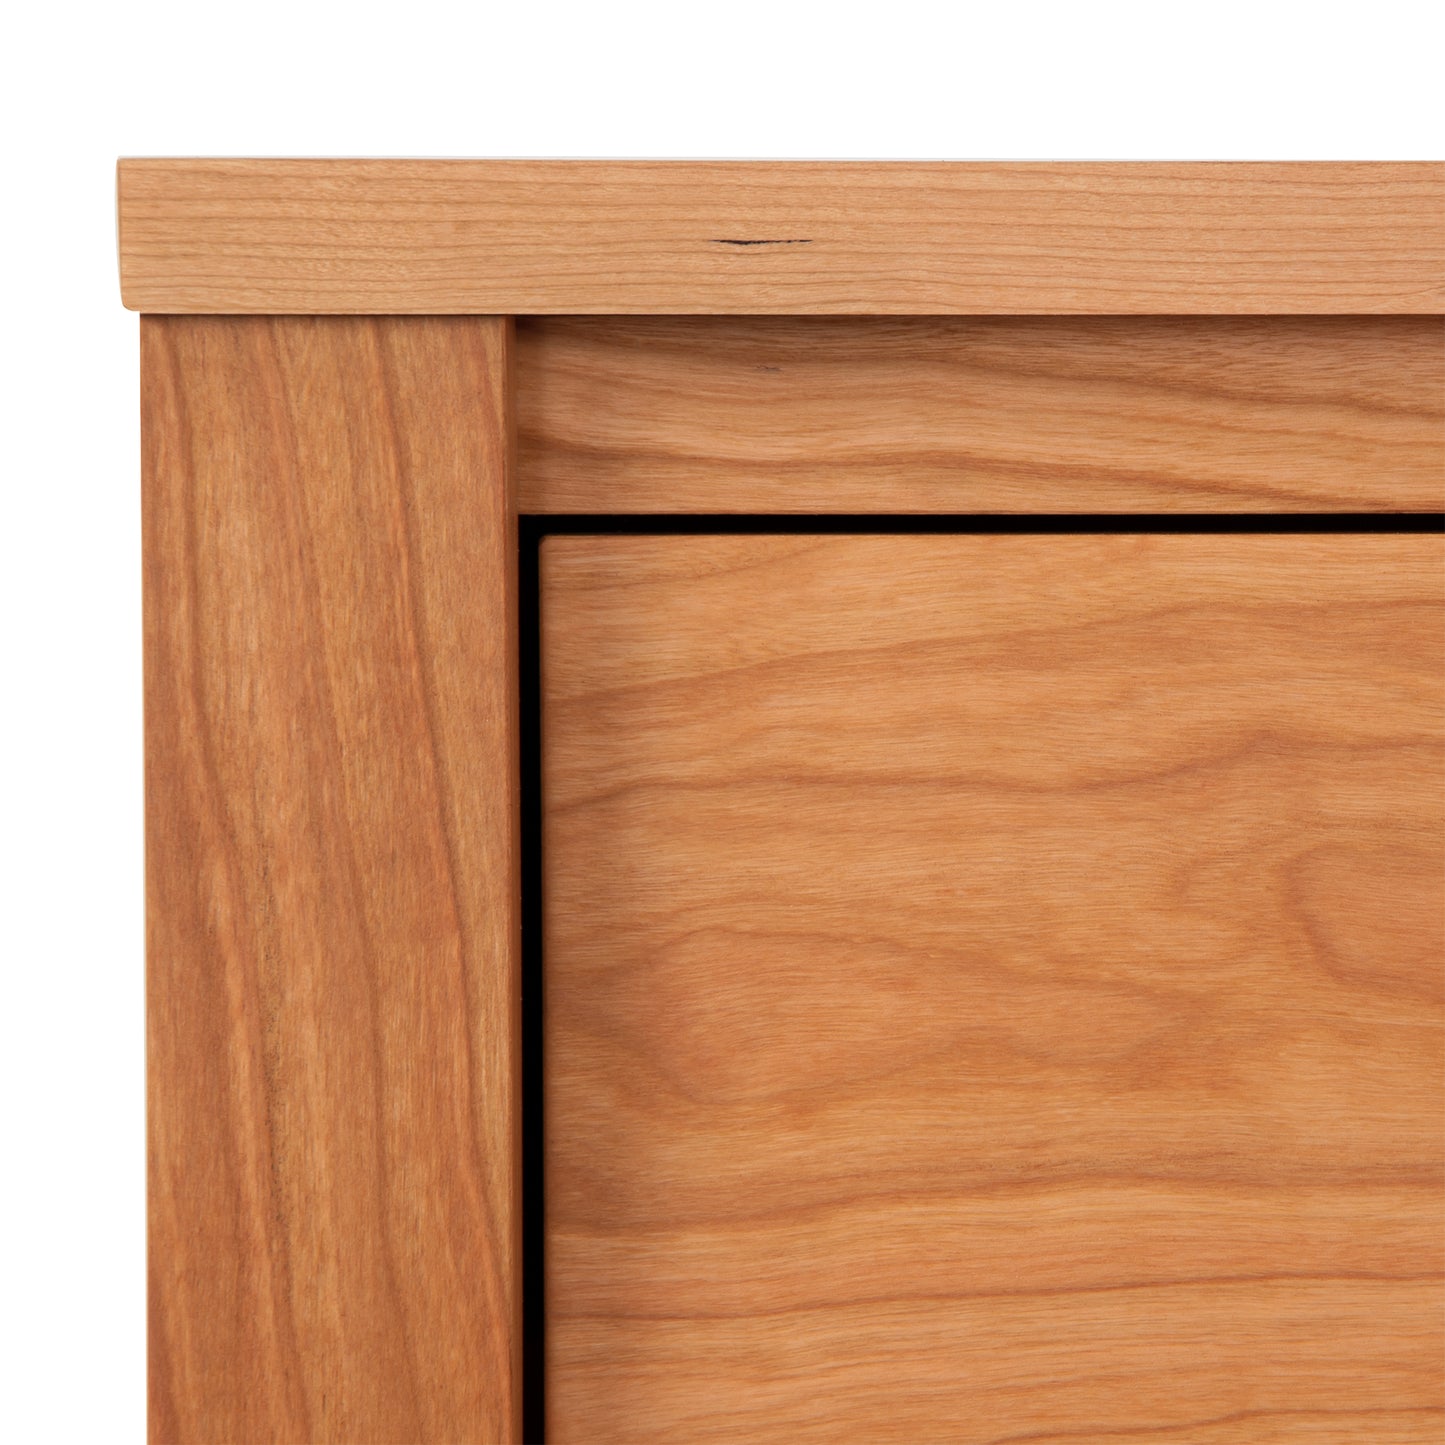 A close up view of a Maple Corner Woodworks Andover Modern 1-Drawer Nightstand with Door, which is sustainably sourced hardwood.